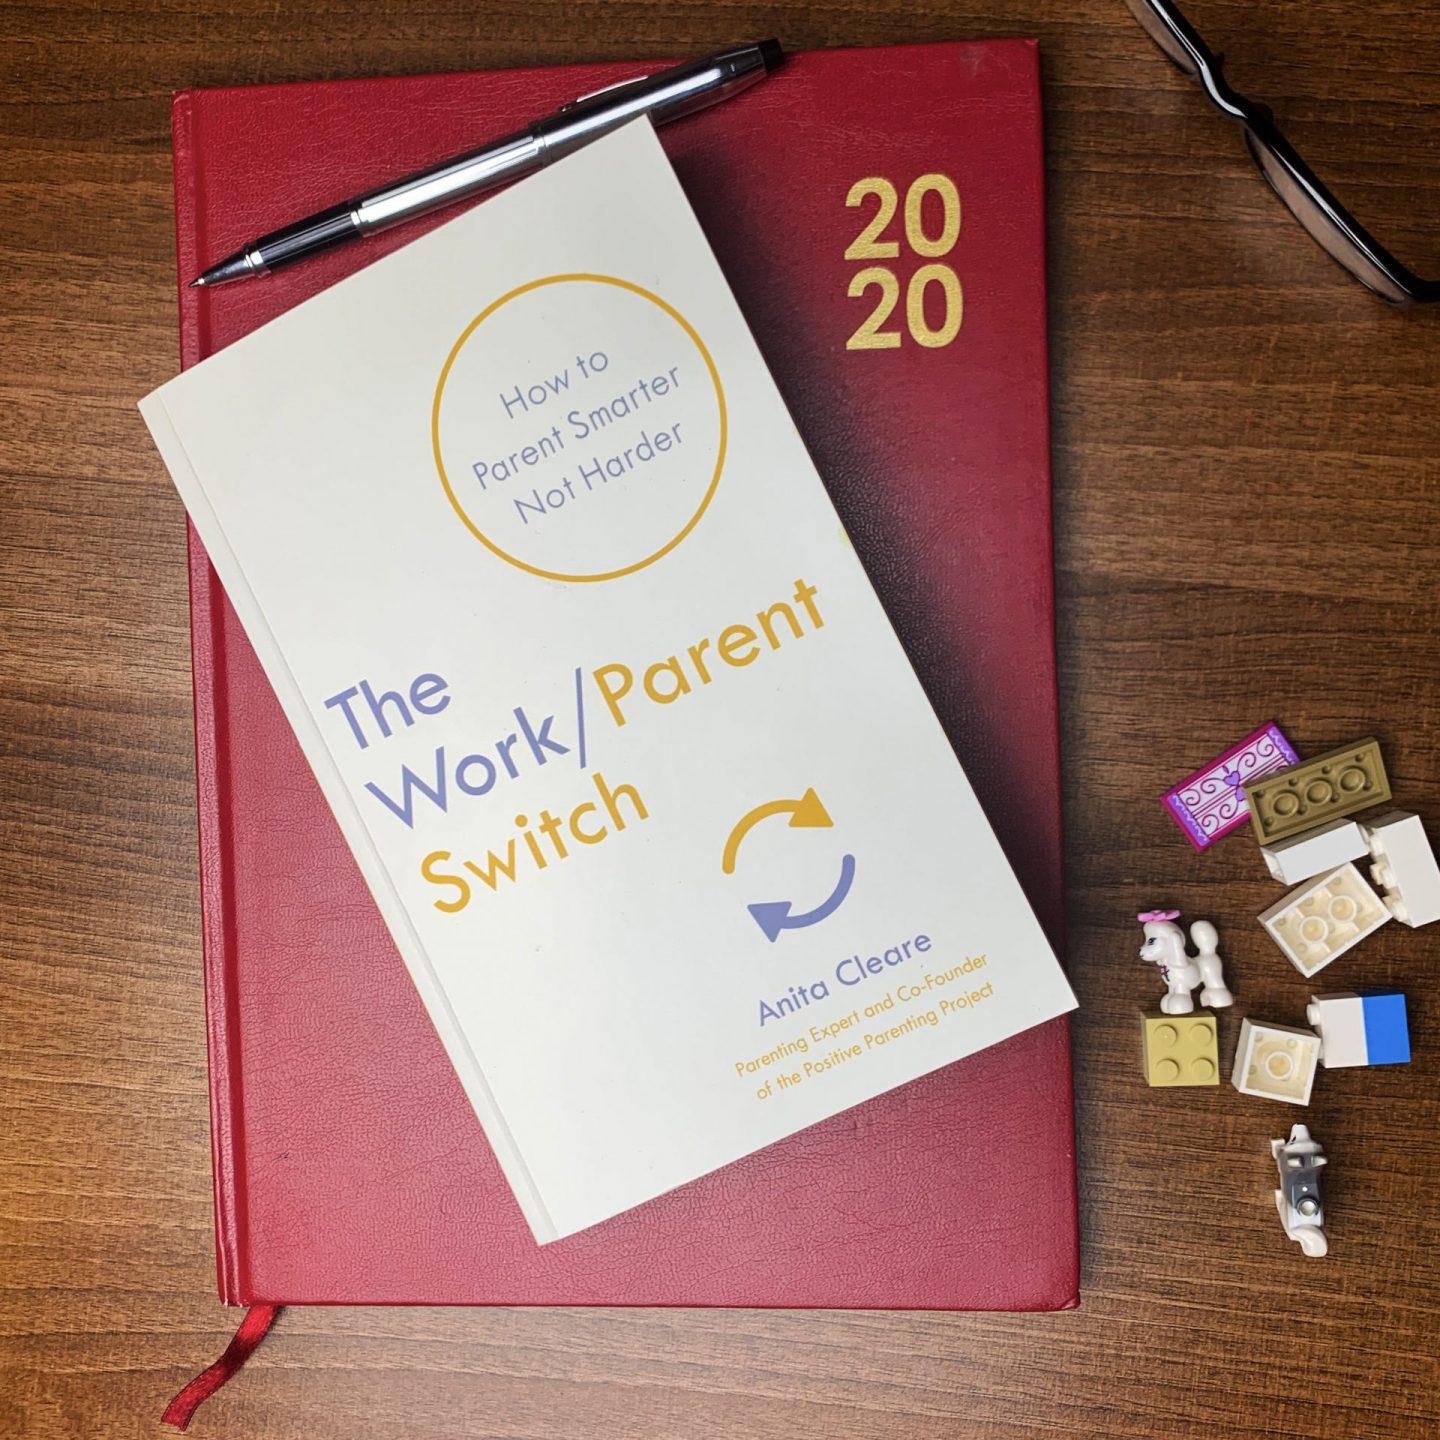 Cover of book The Work Parent Switch by Anita Cleare.